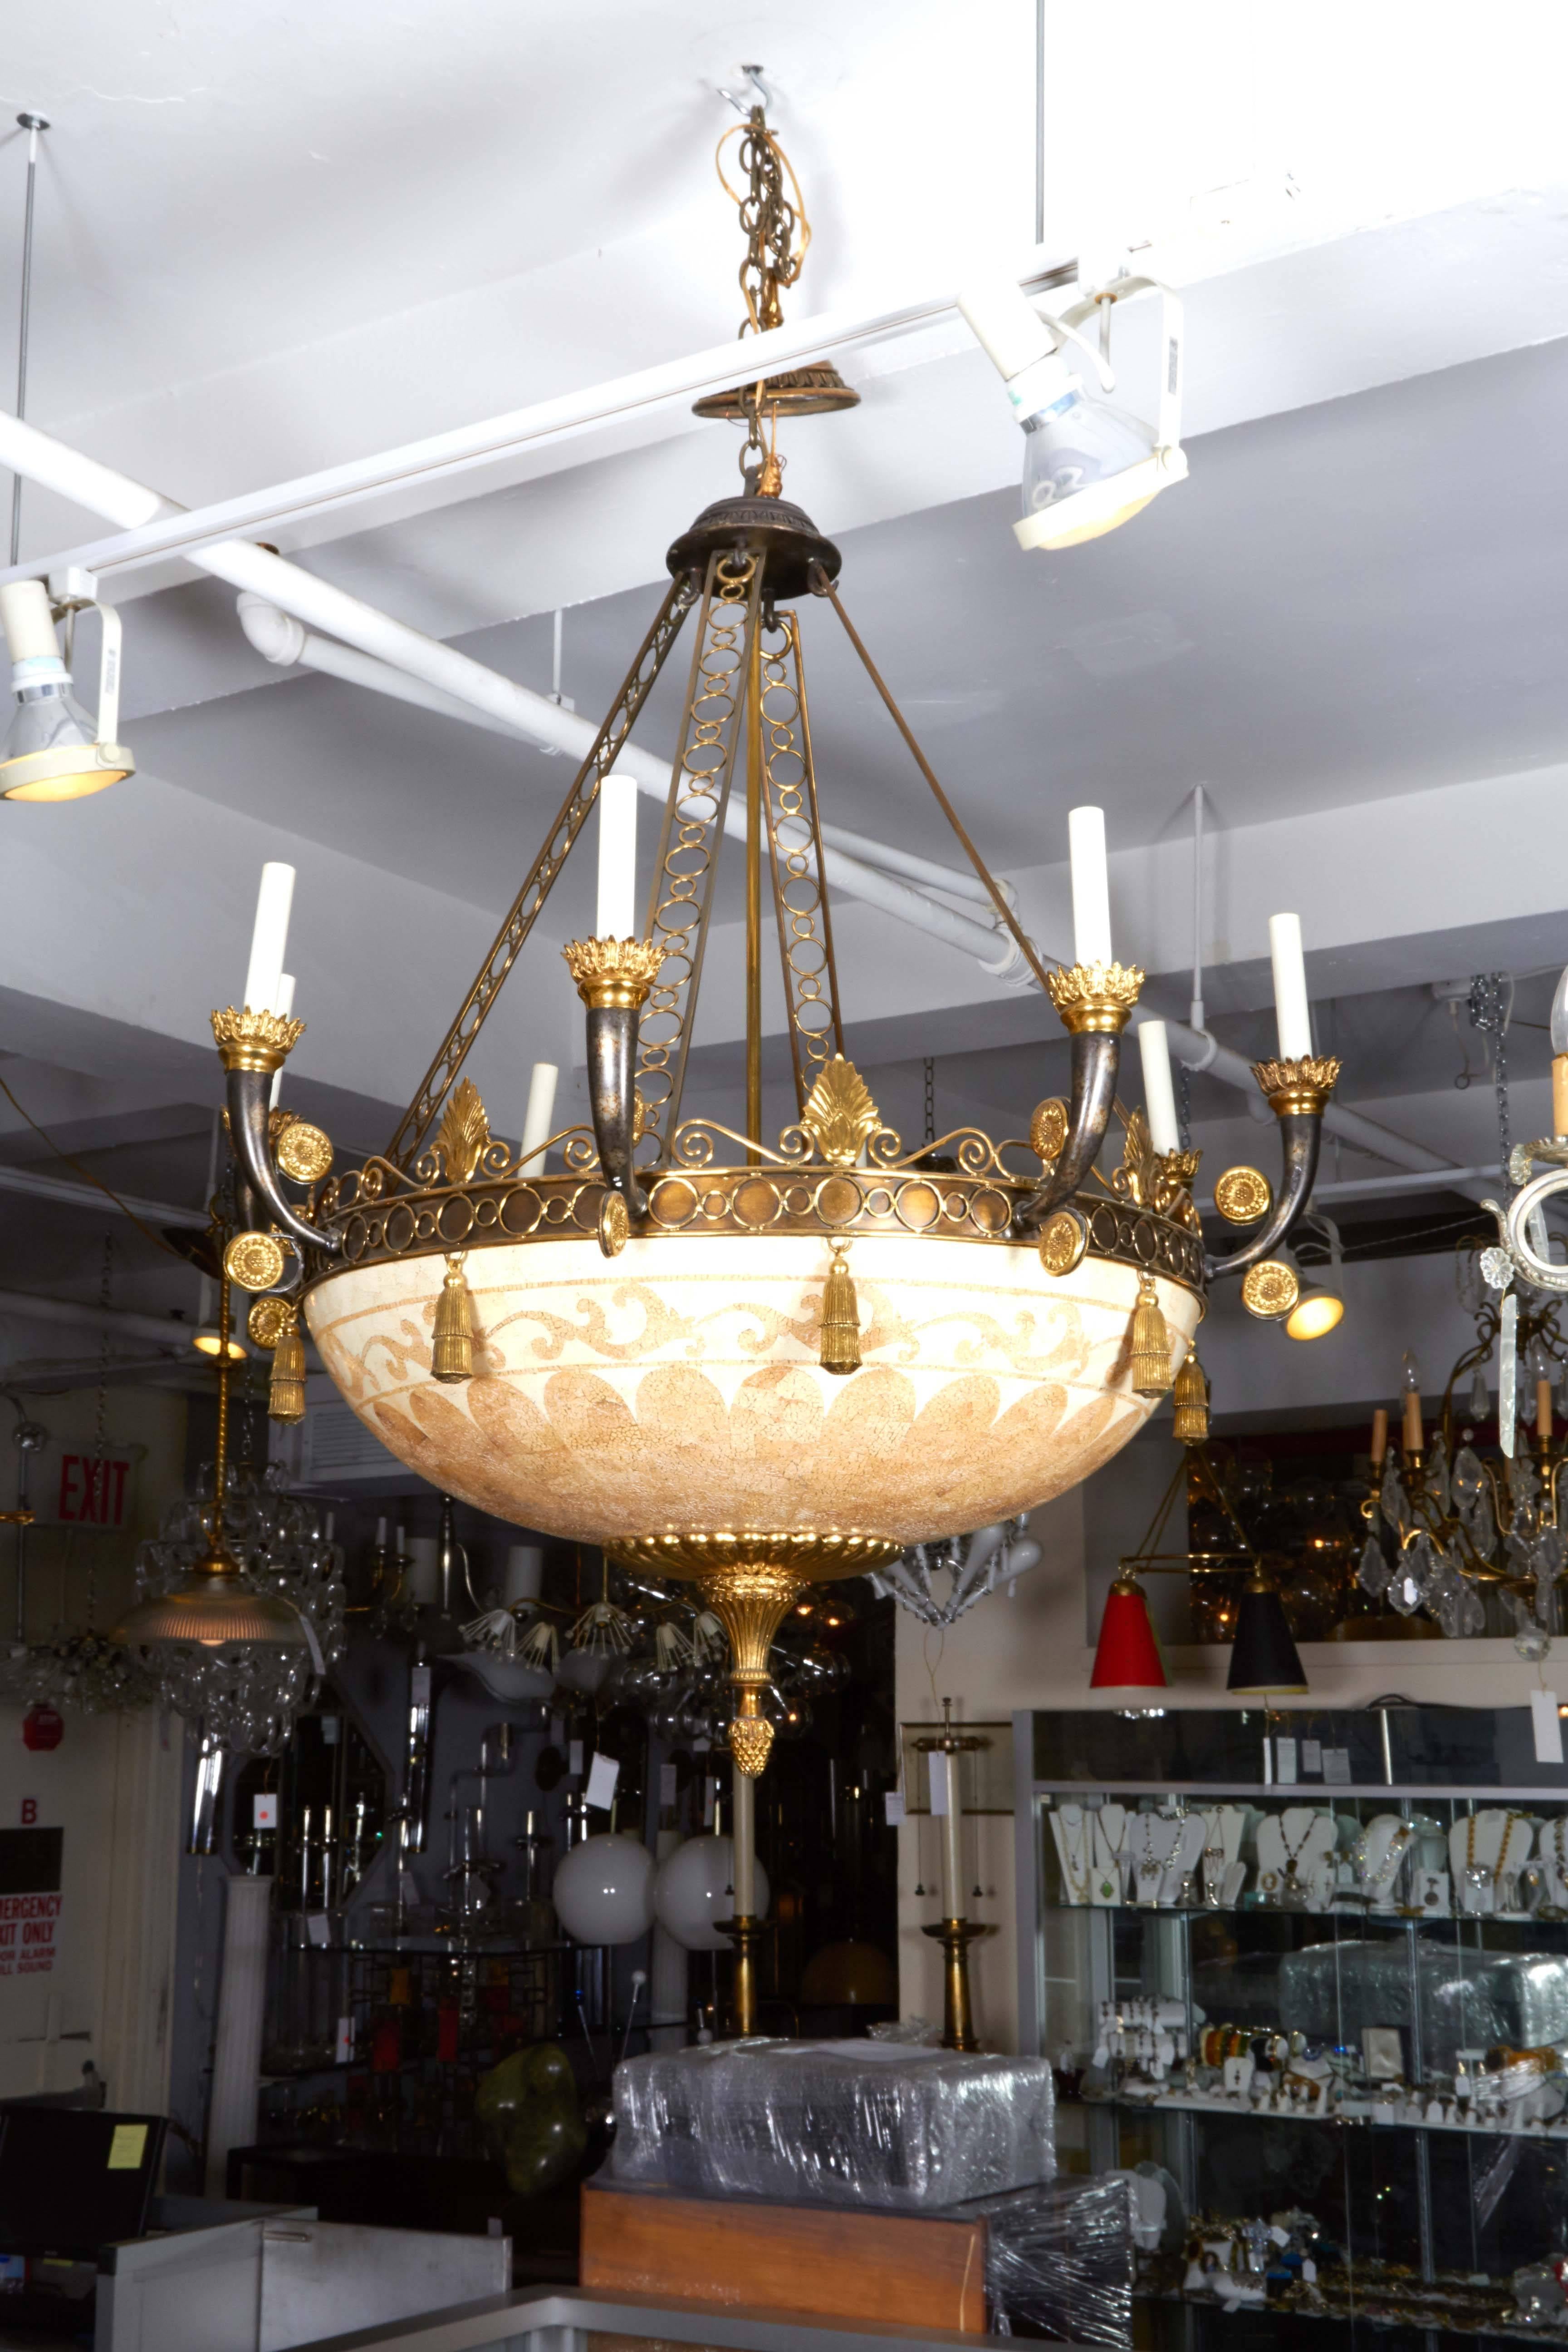 A vintage chandelier in the Empire style, including inverted shade with berry finial, designed with classically inspired mosaic in cast resin, accented with anthemions and s-scrolls to the rim, above ring border with hanging tassels, supporting